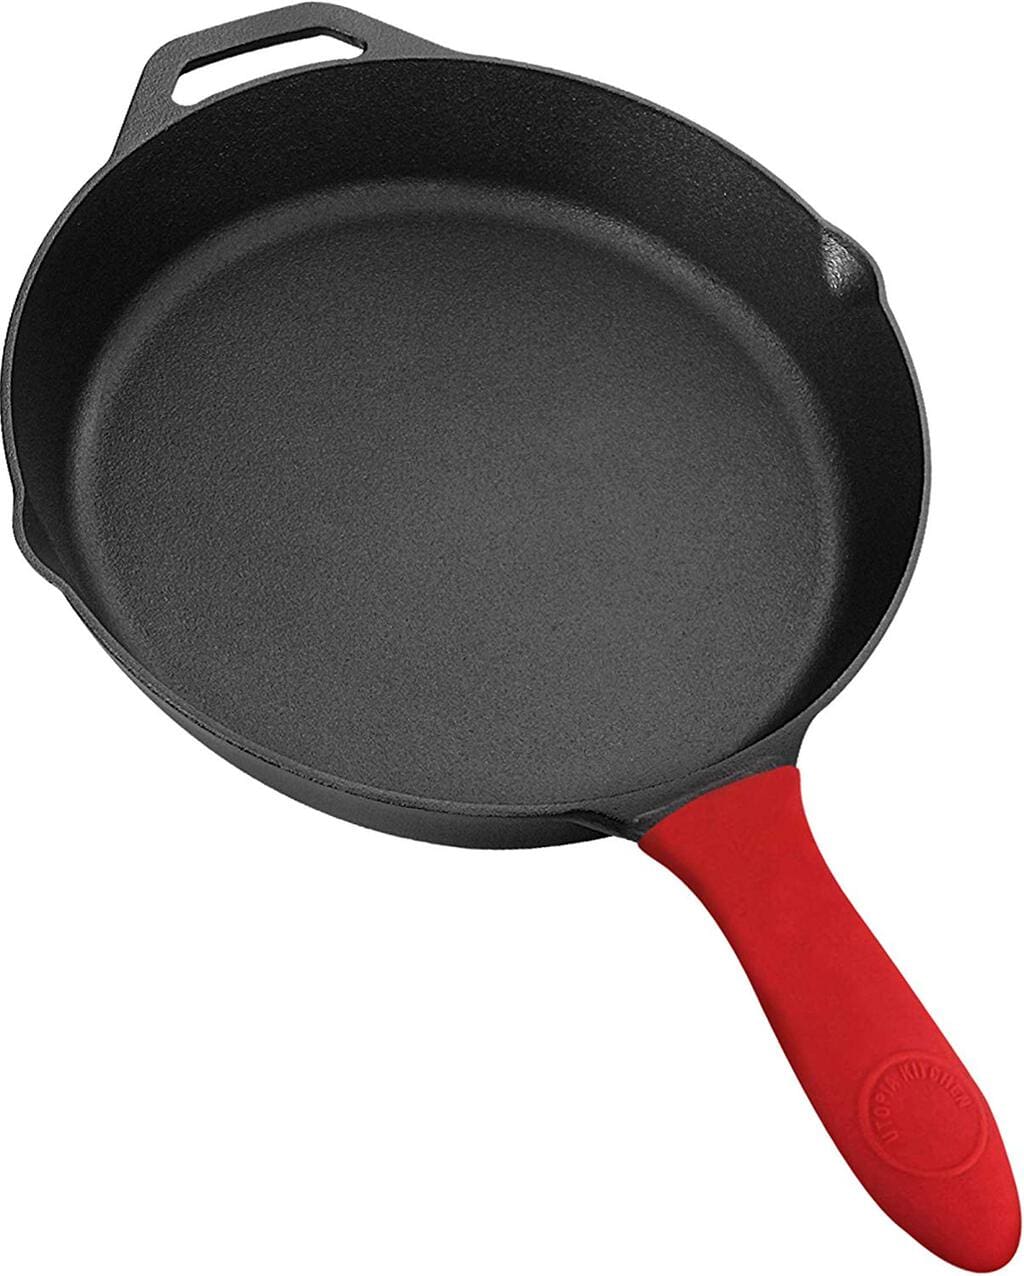 Cast iron pan with silicone handle